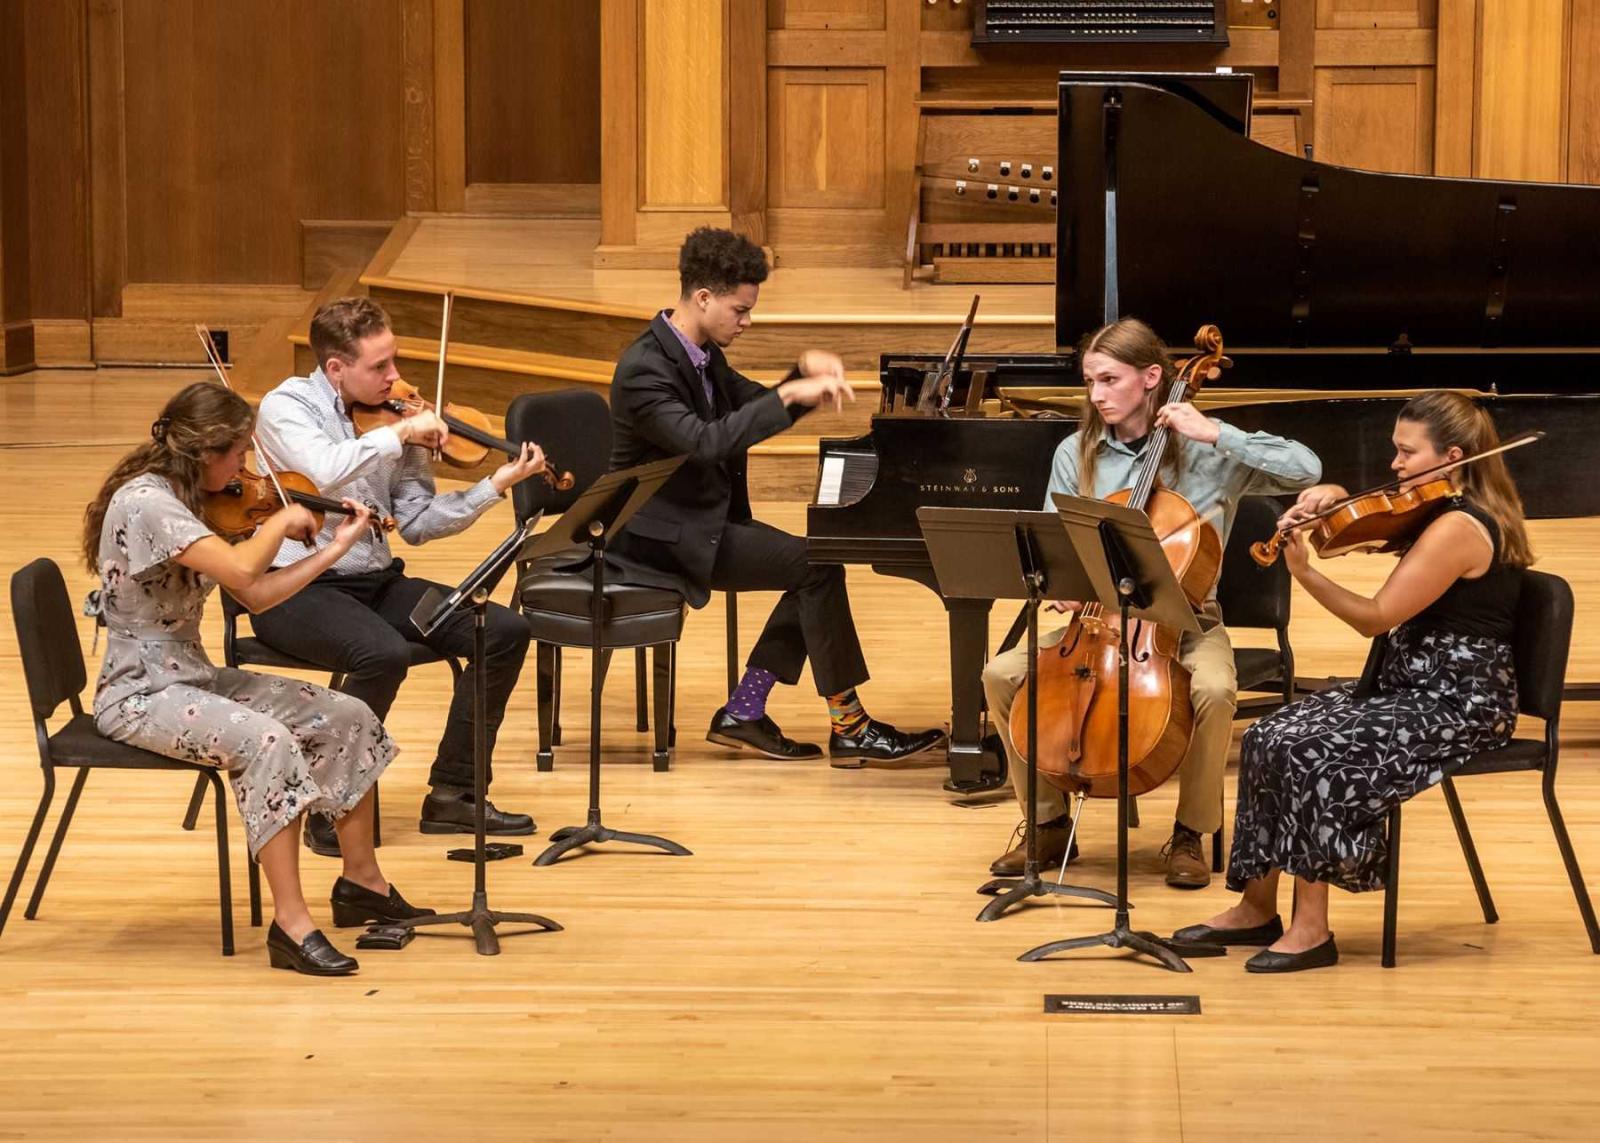 Students taking part in the Decoda Chamber Music Festival perform on the Memorial Chapel stage.